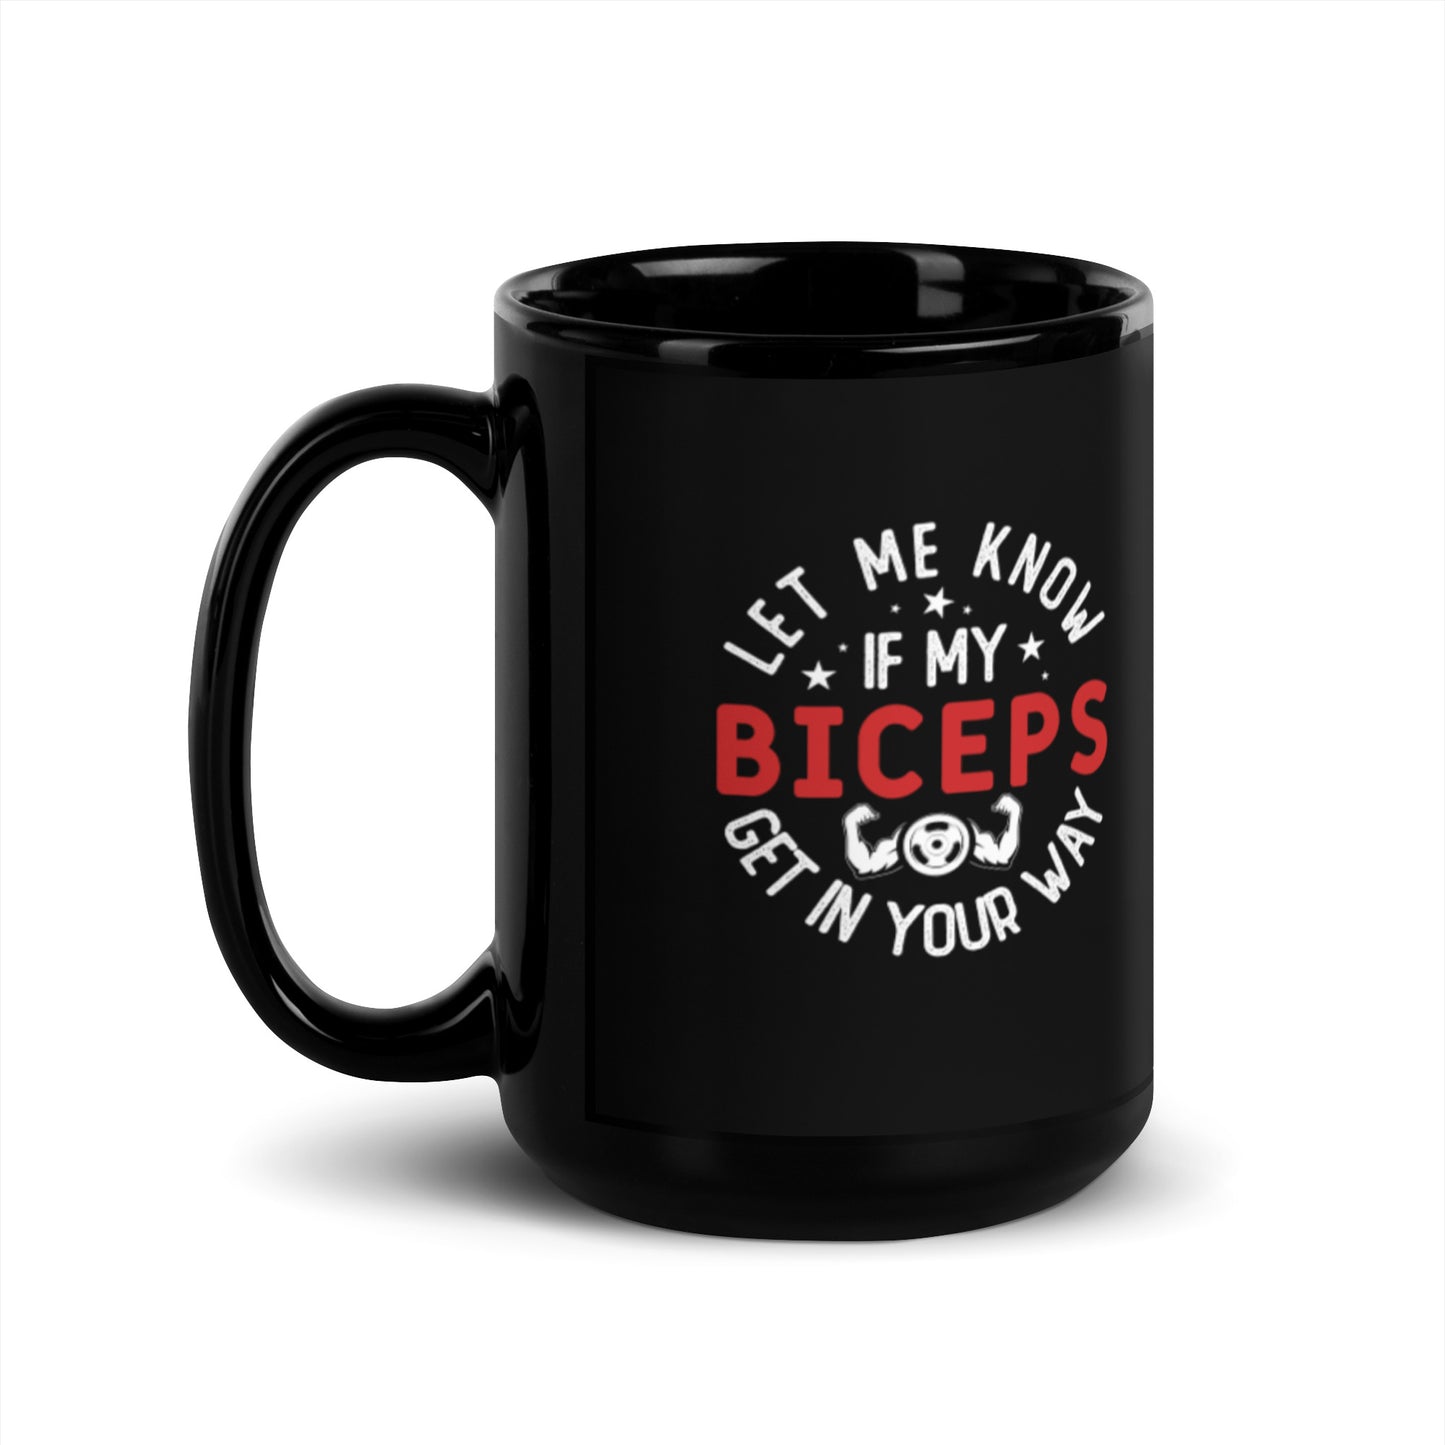 Let Me Know if My Biceps Get in Your Way Black Glossy Mug